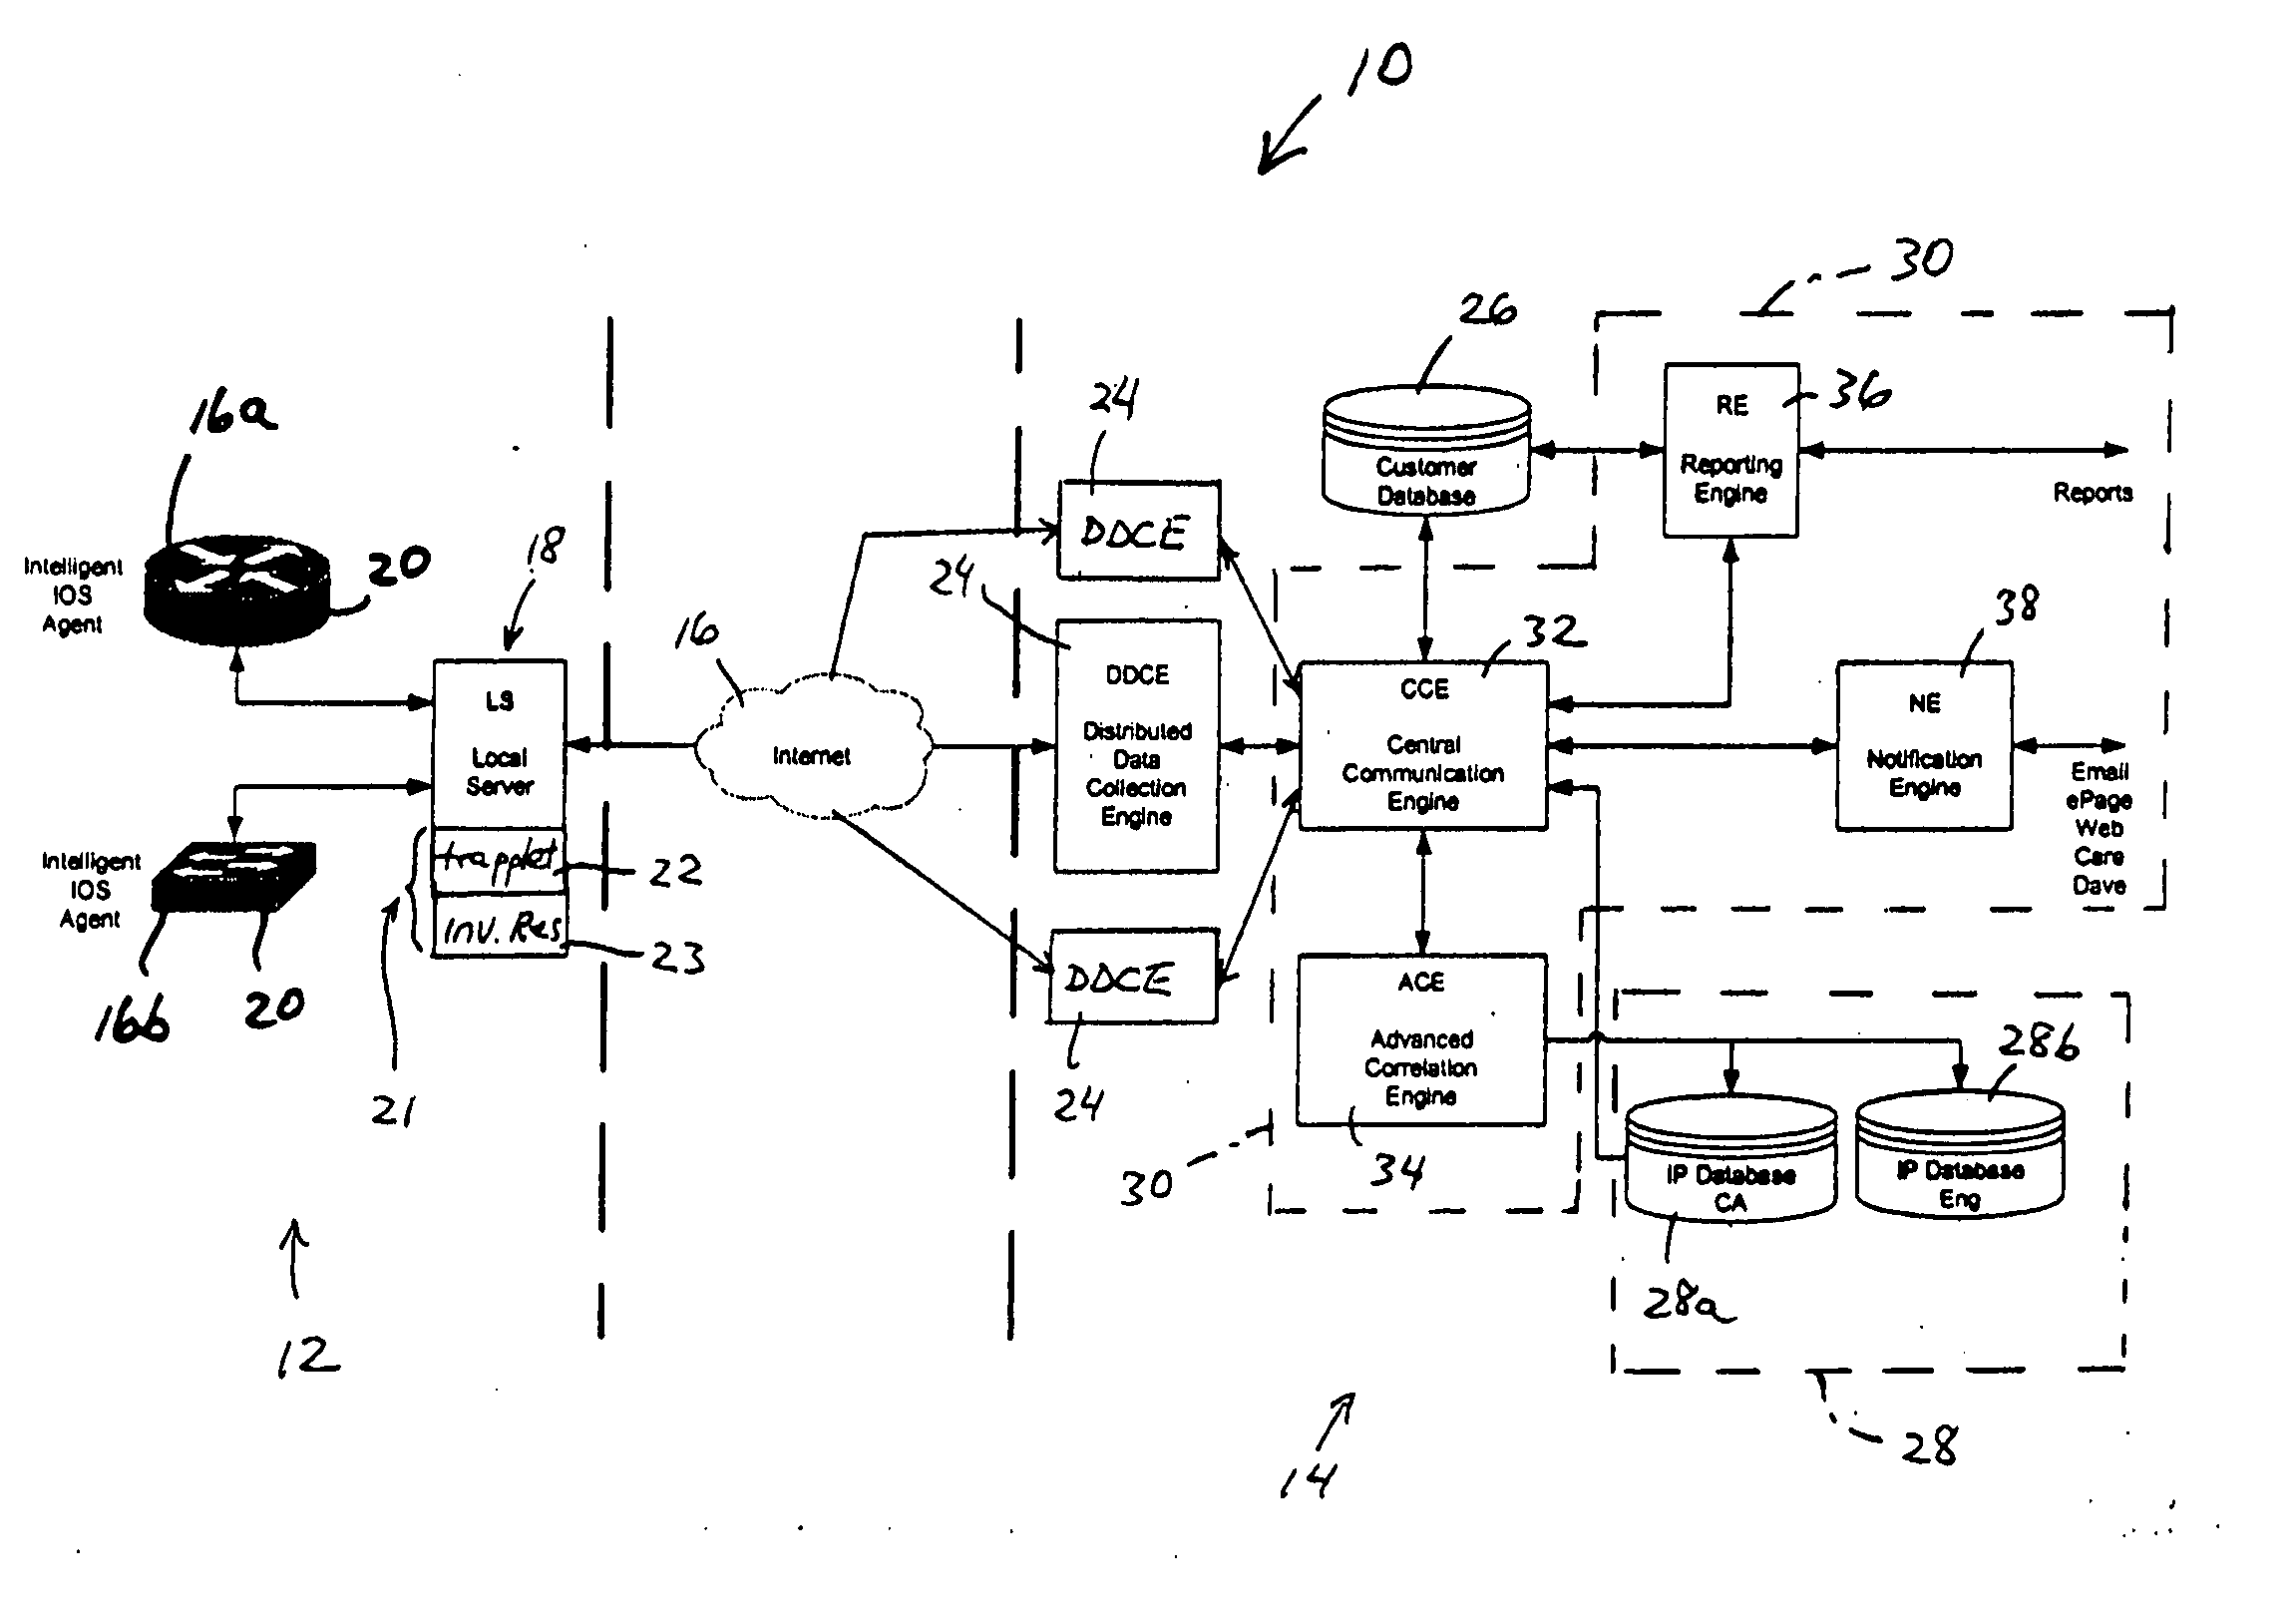 Arrangement for automated fault detection and fault resolution of a network device